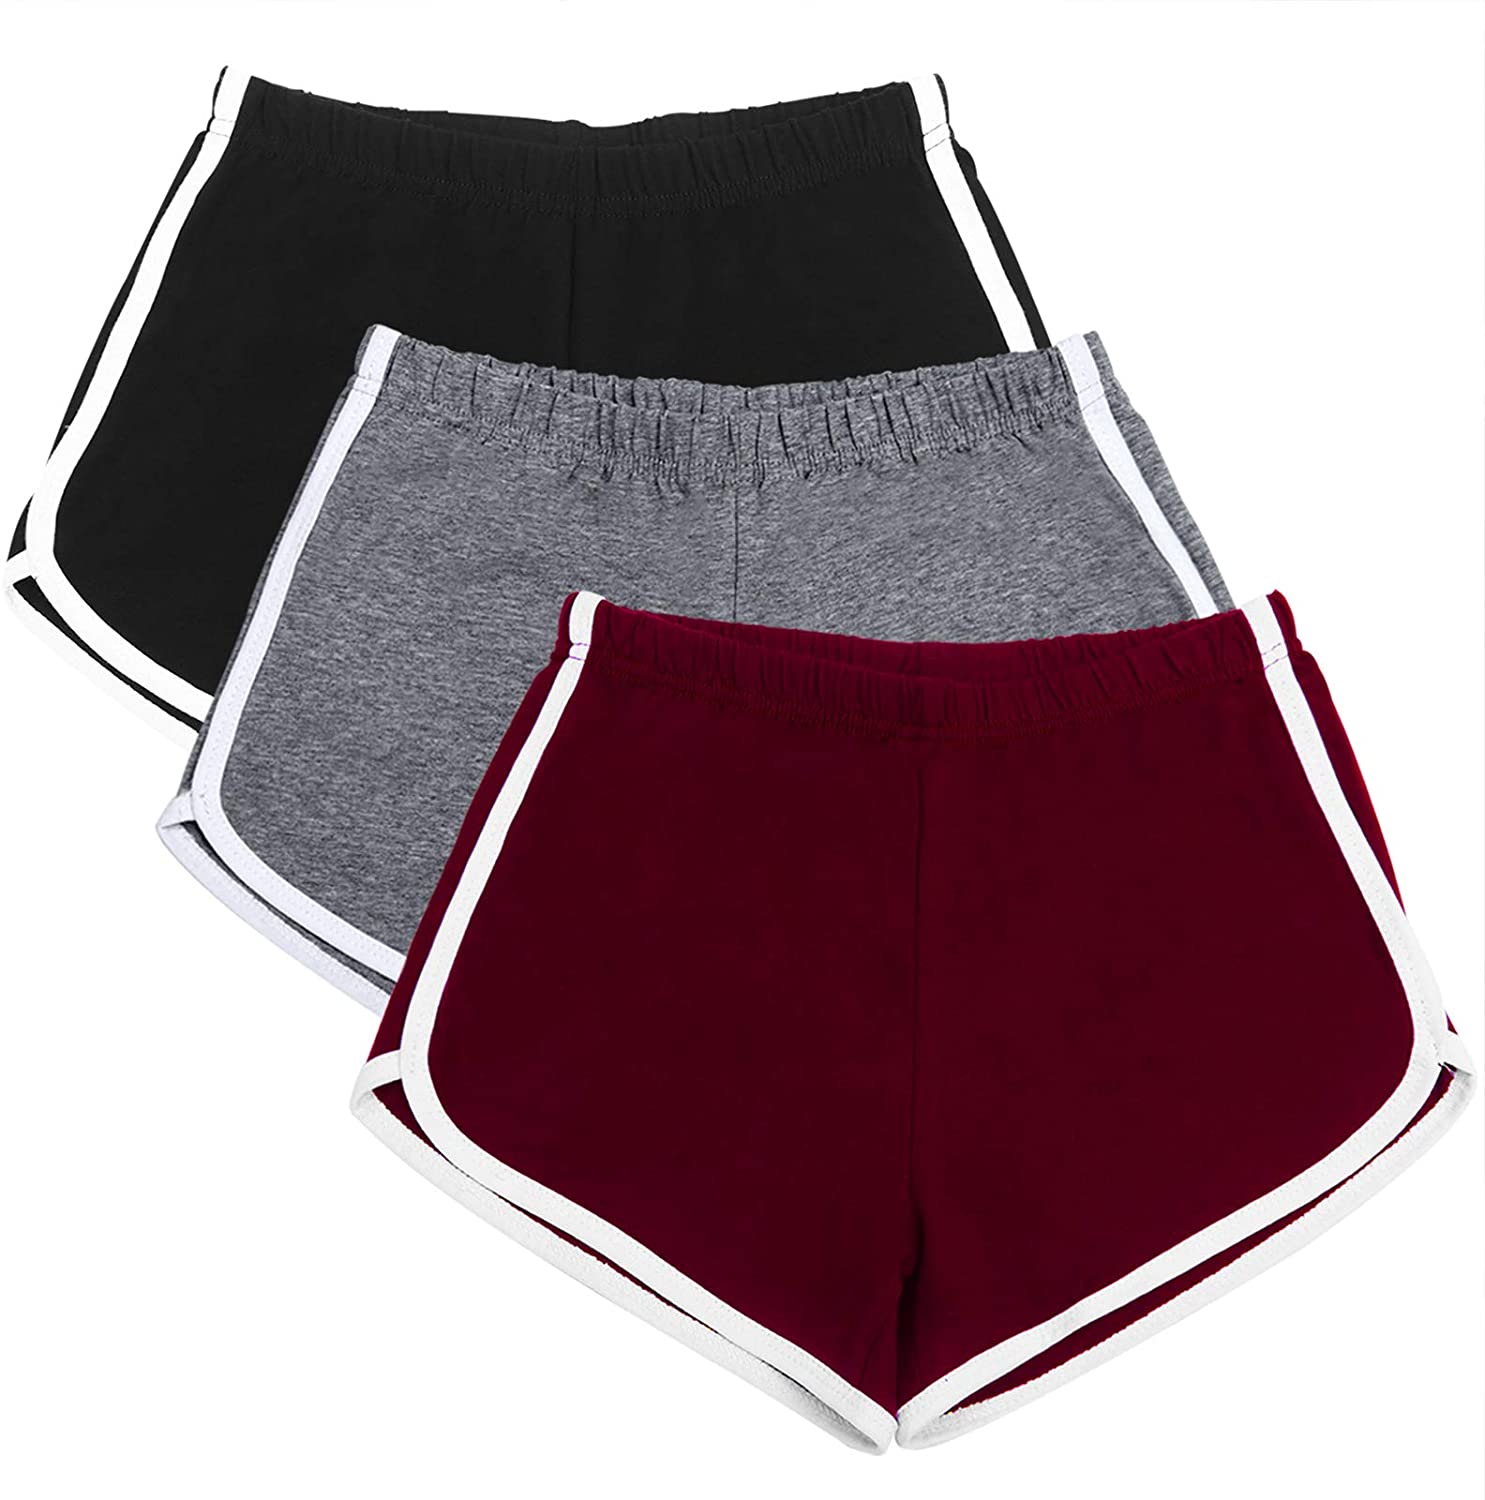 Girls 3 Pack Running Athletic Cotton Shorts Baby Toddler Big Girl Gym Workout Fashion Dolphin Sports Shorts 